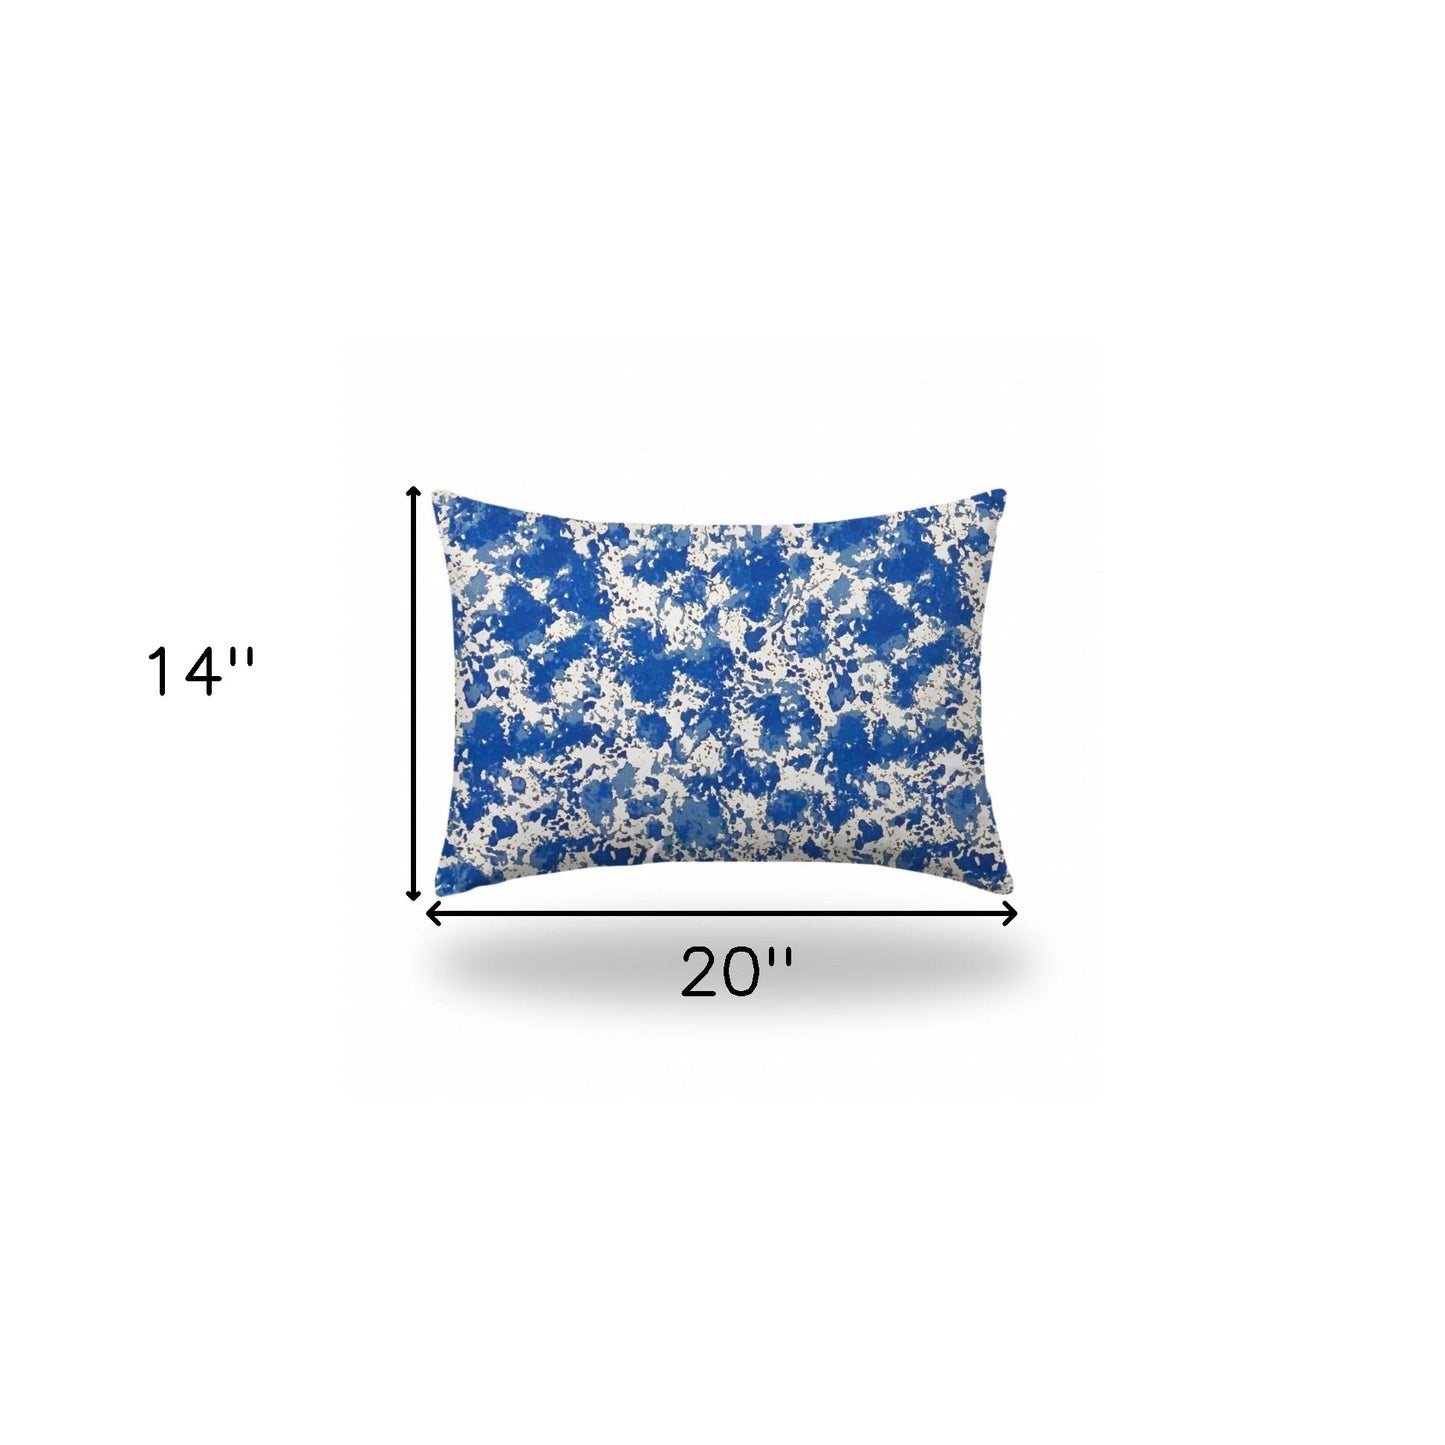 14" X 20" Blue And White Enveloped Lumbar Indoor Outdoor Pillow Cover